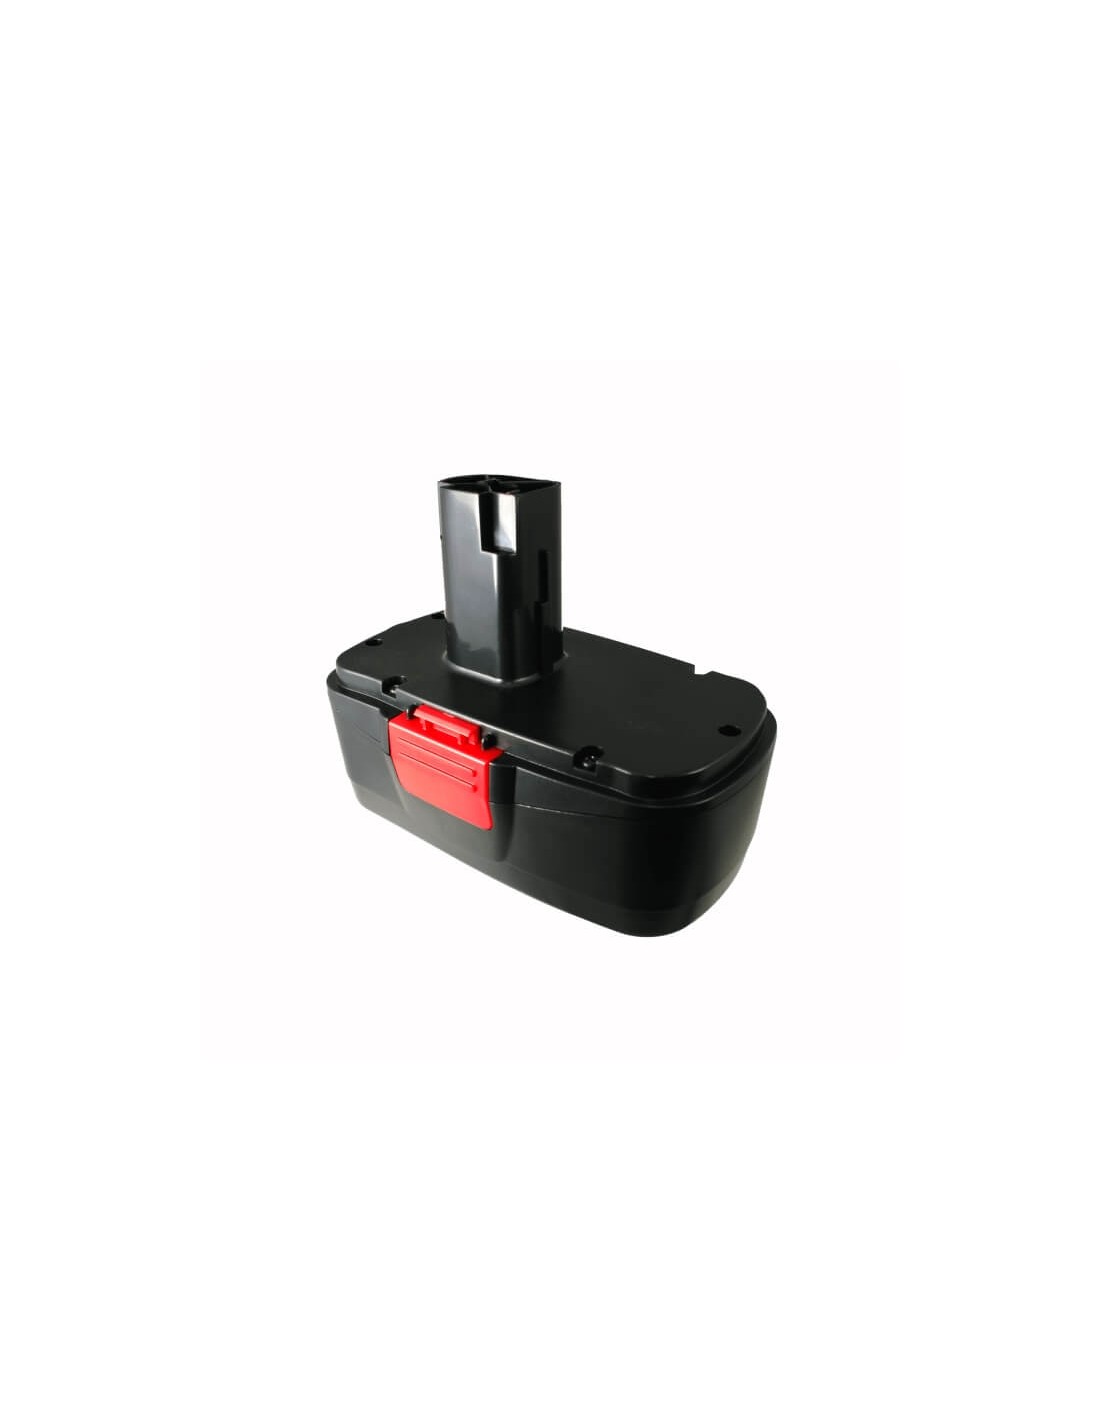 Battery for Diehard Craftsman tools fits 130235030 & Others , 19.2V, 1500mAh - 28.80Wh